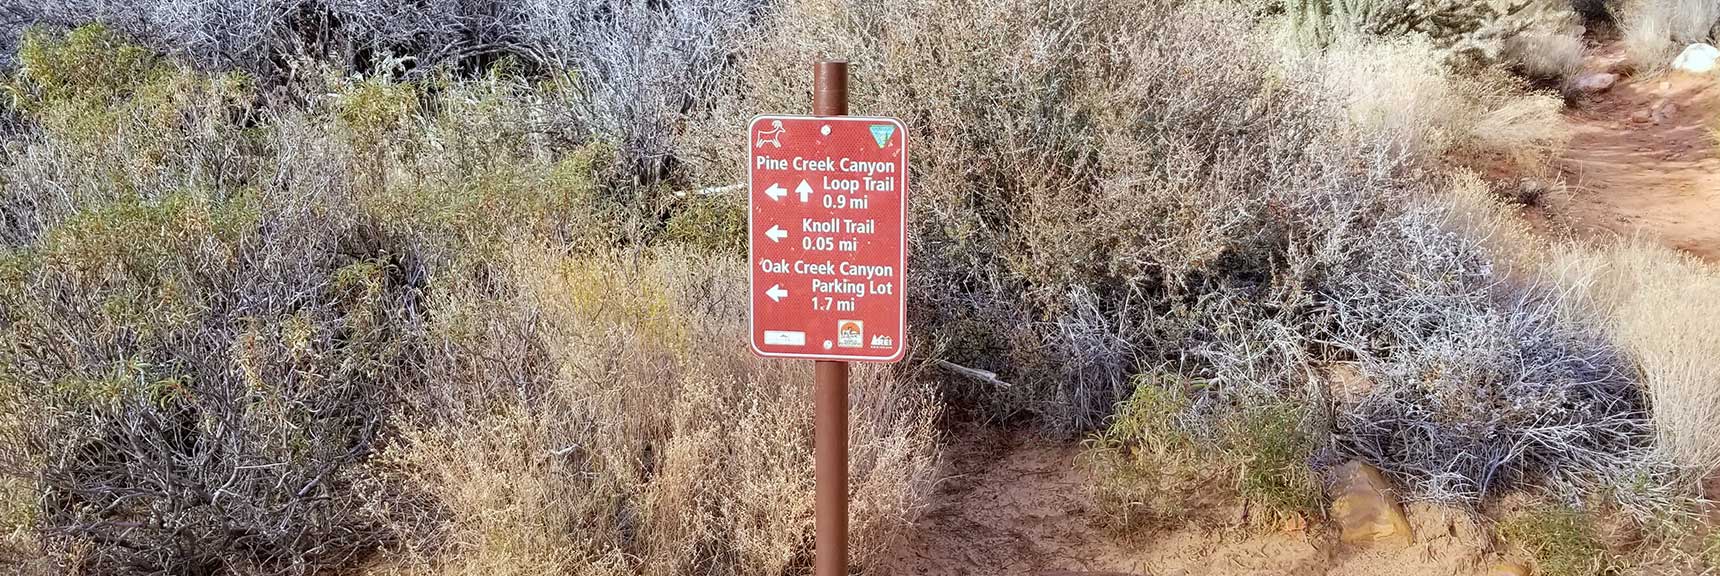 Small Part of the Trail System in Pine Creek Canyon, Red Rock National Park, Nevada